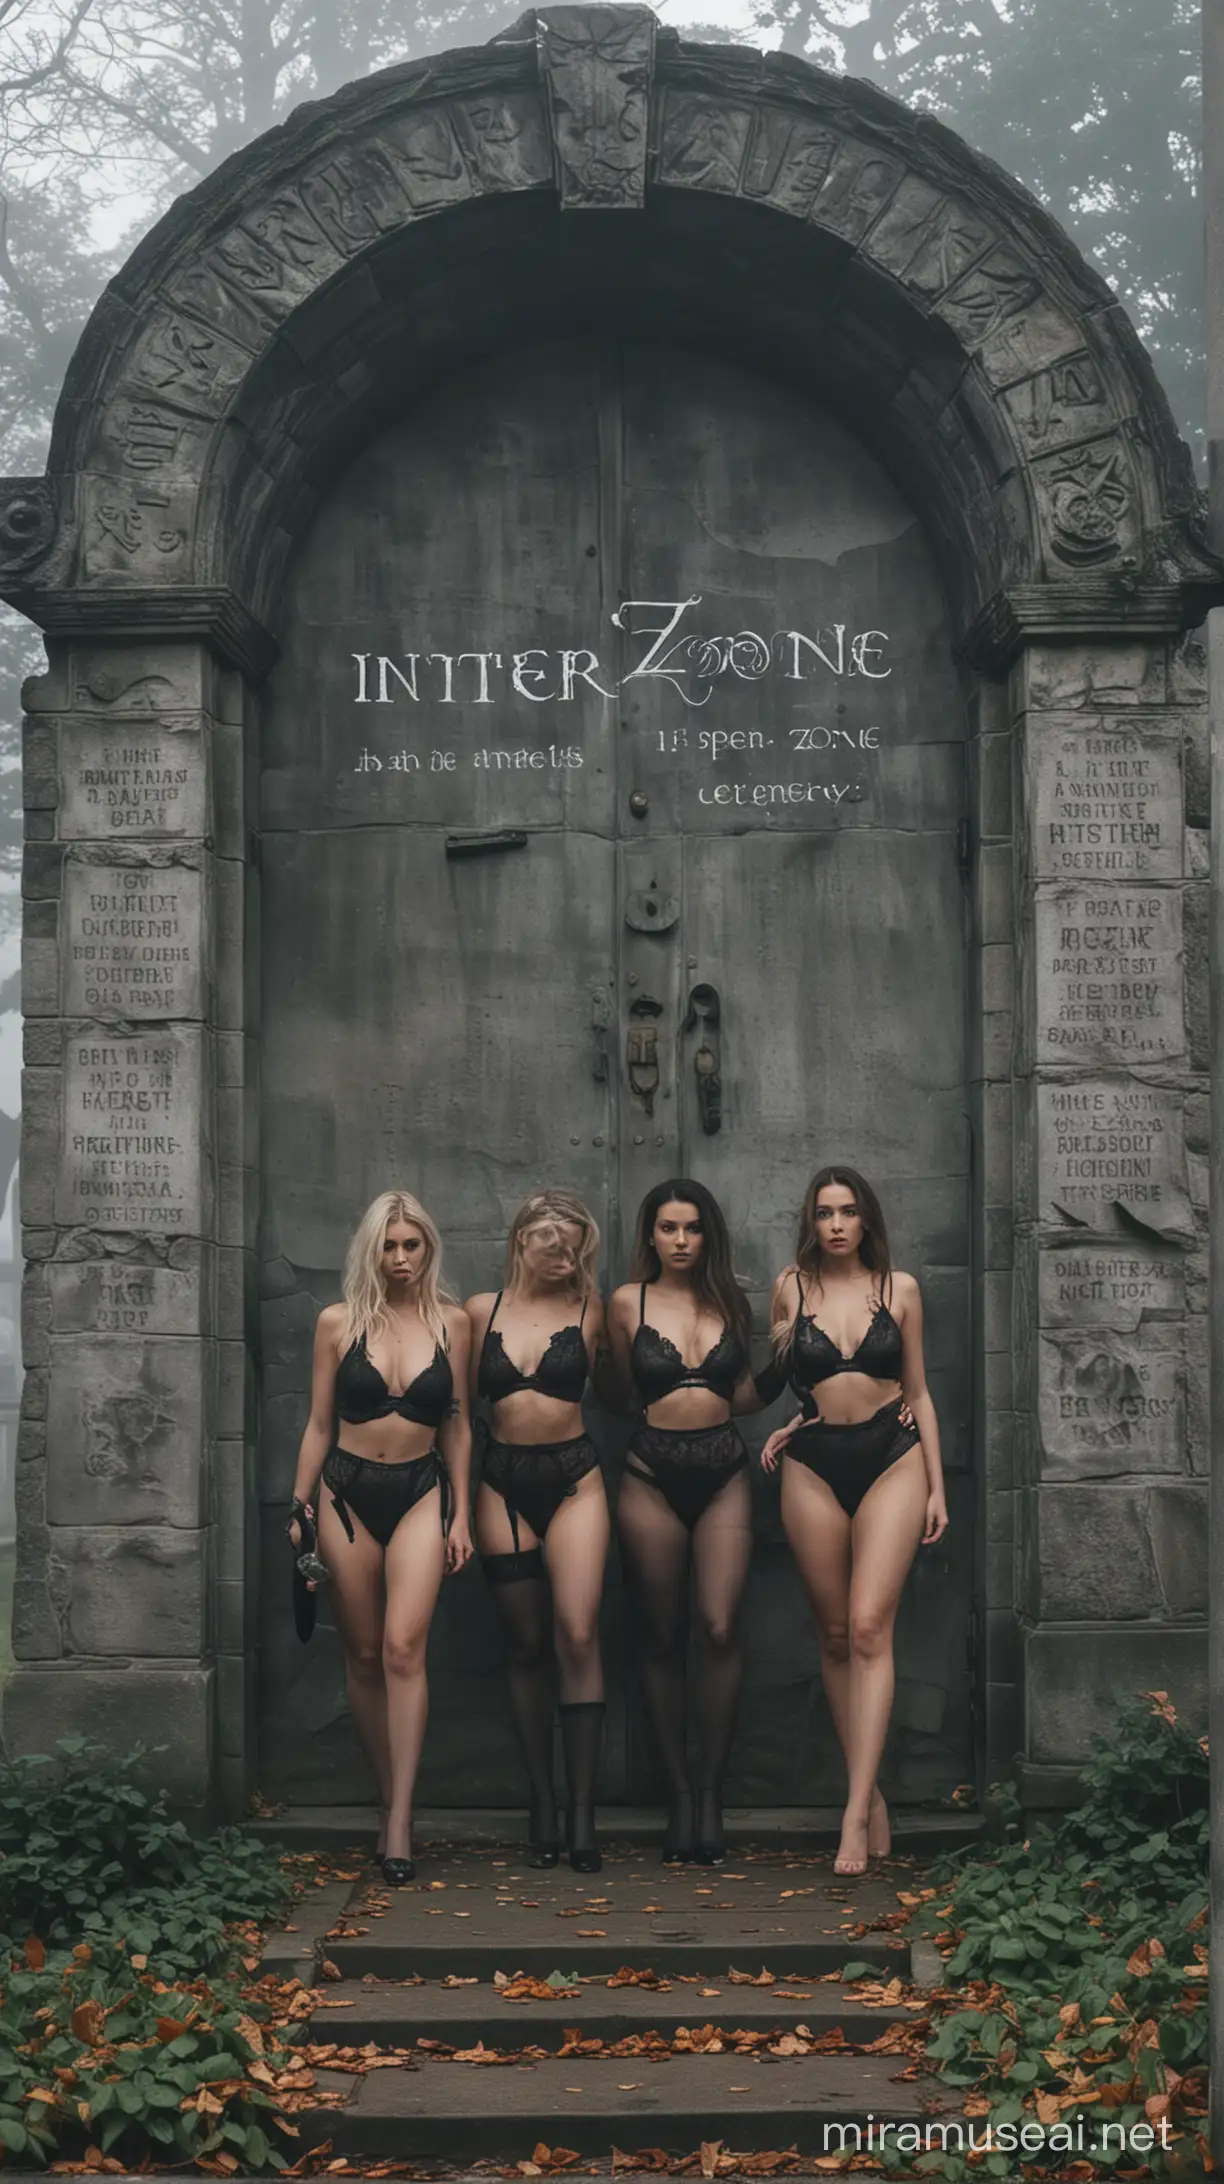 the exact text "INTERZONE," inscribed over an OPEN stone door,  outside are THREE beautiful  WOMEN in black lingerie, they walk gracefully in a foggy cemetery